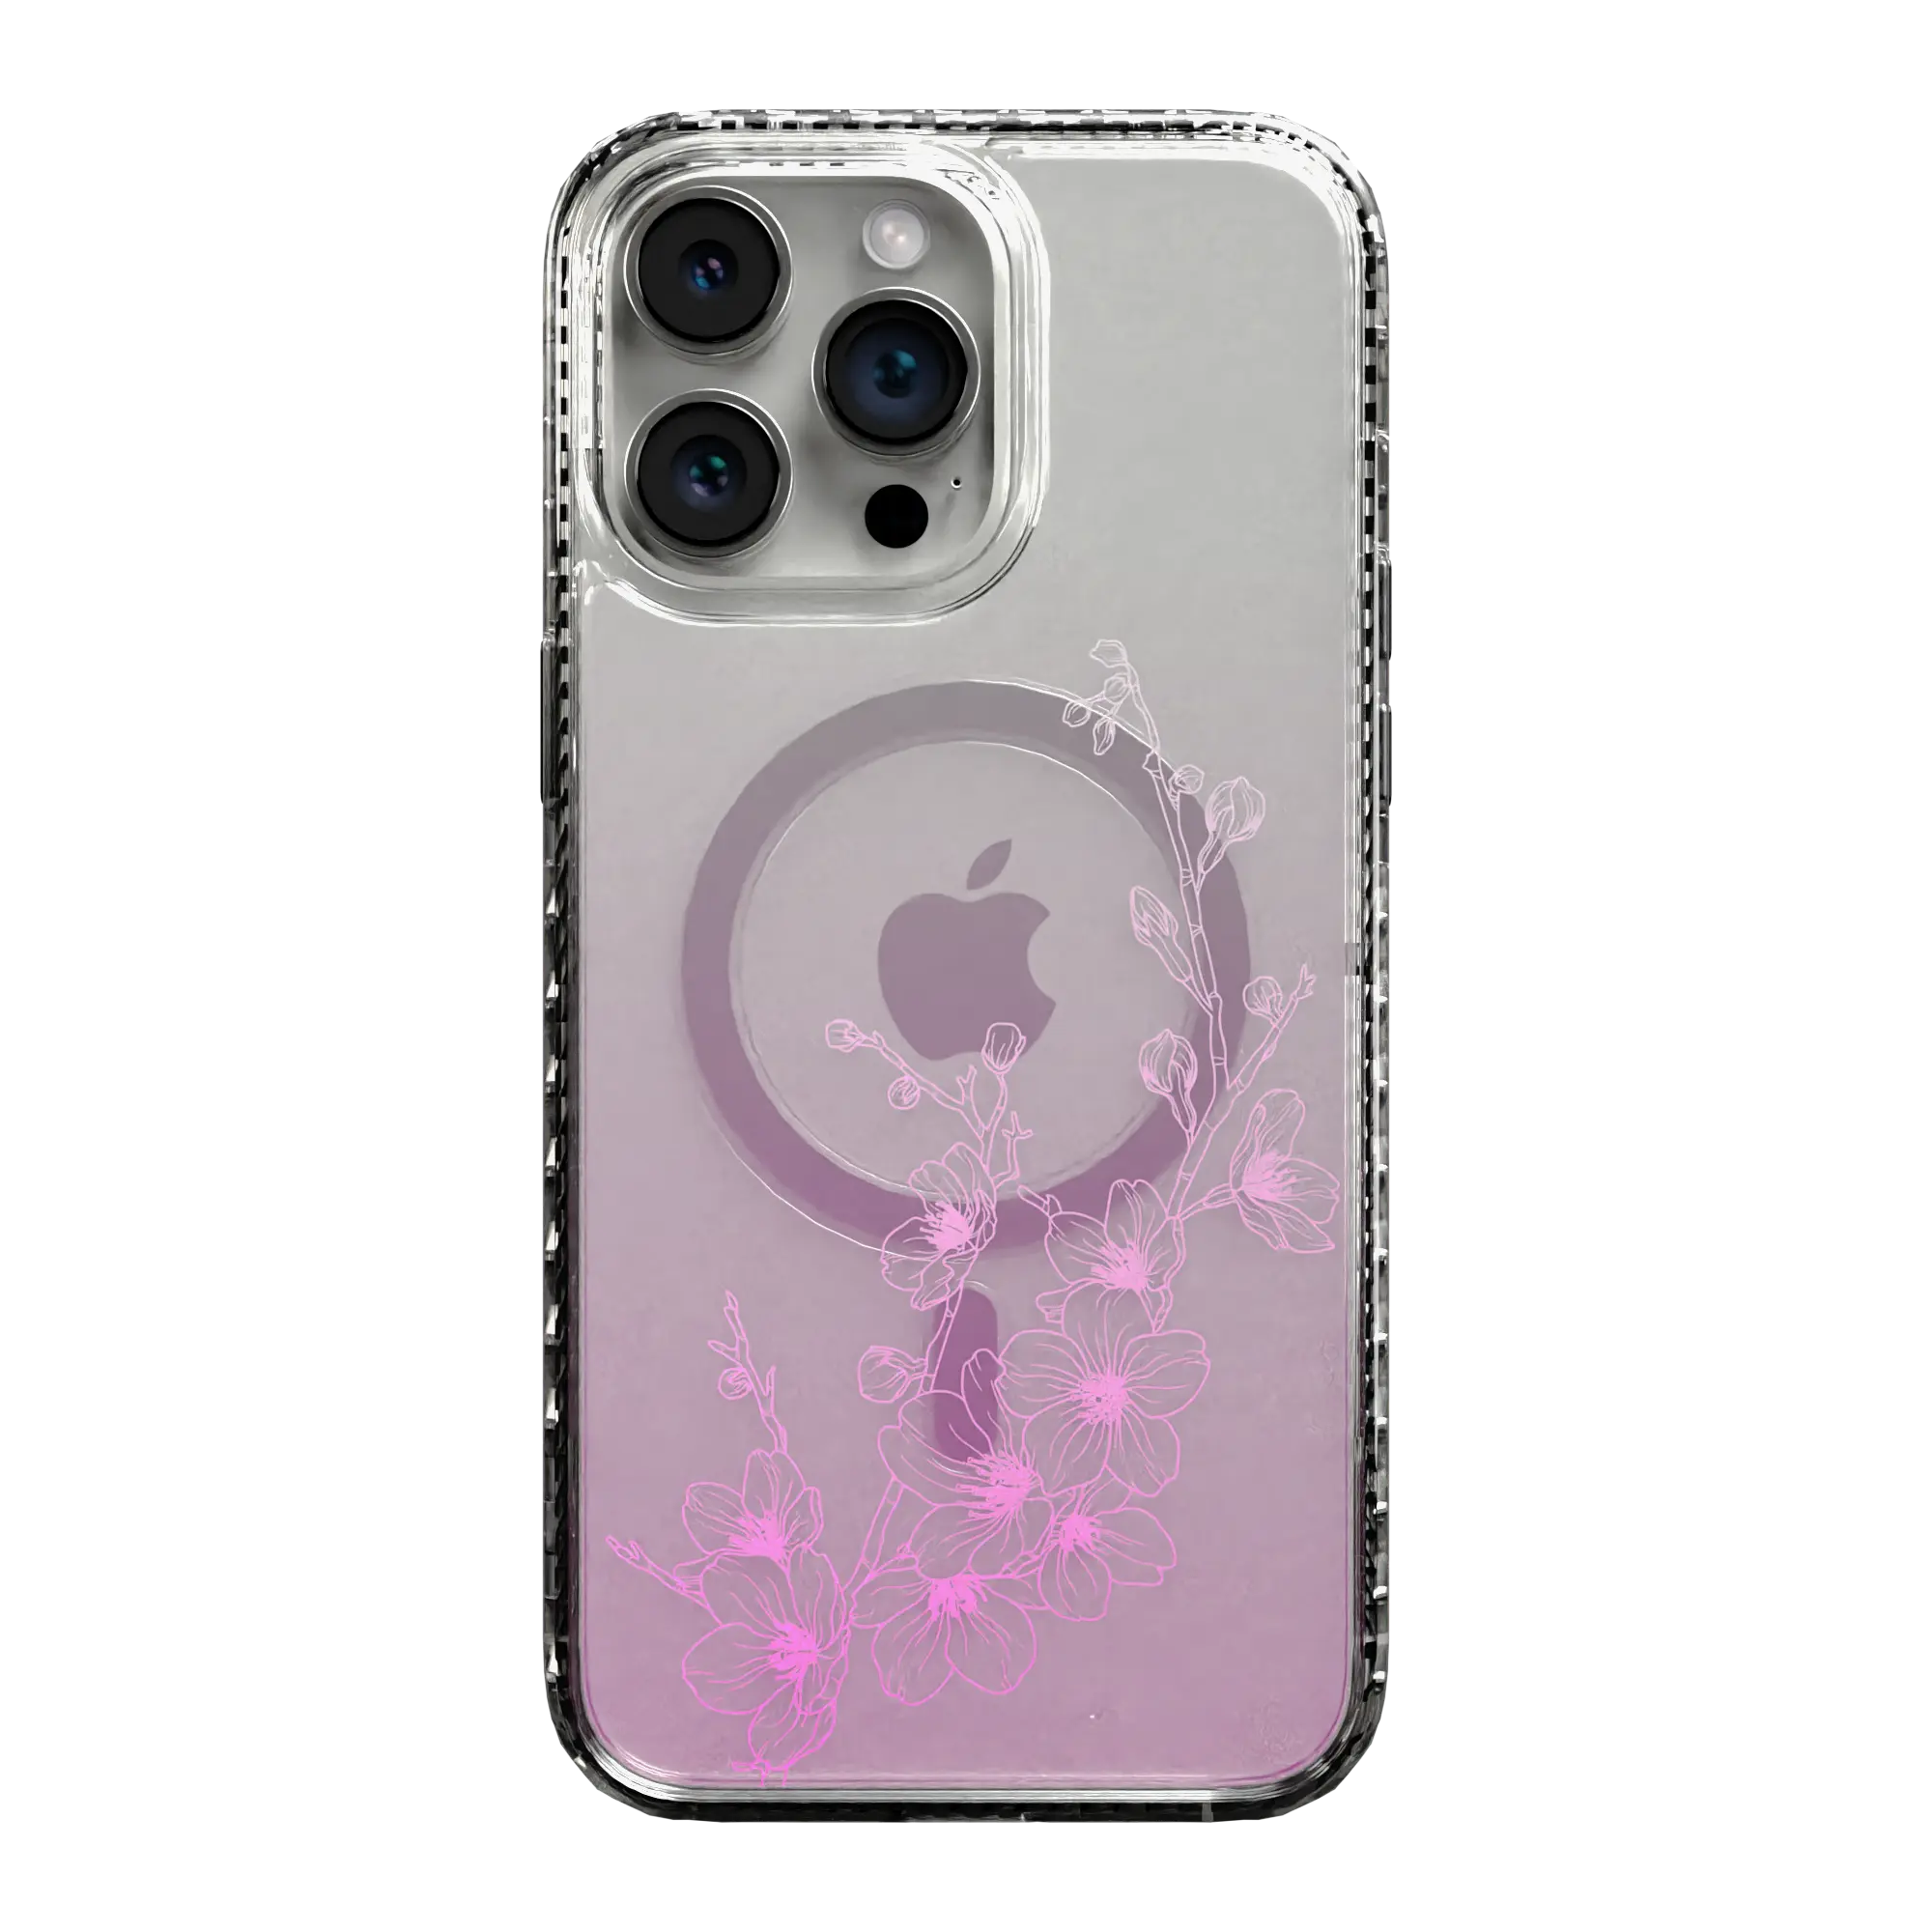 Apple-iPhone-14-Pro-Max-Crystal-Clear Ballet Blush | Protective MagSafe Case | Ombre Bouquet Collection for Apple iPhone 14 Series cellhelmet cellhelmet